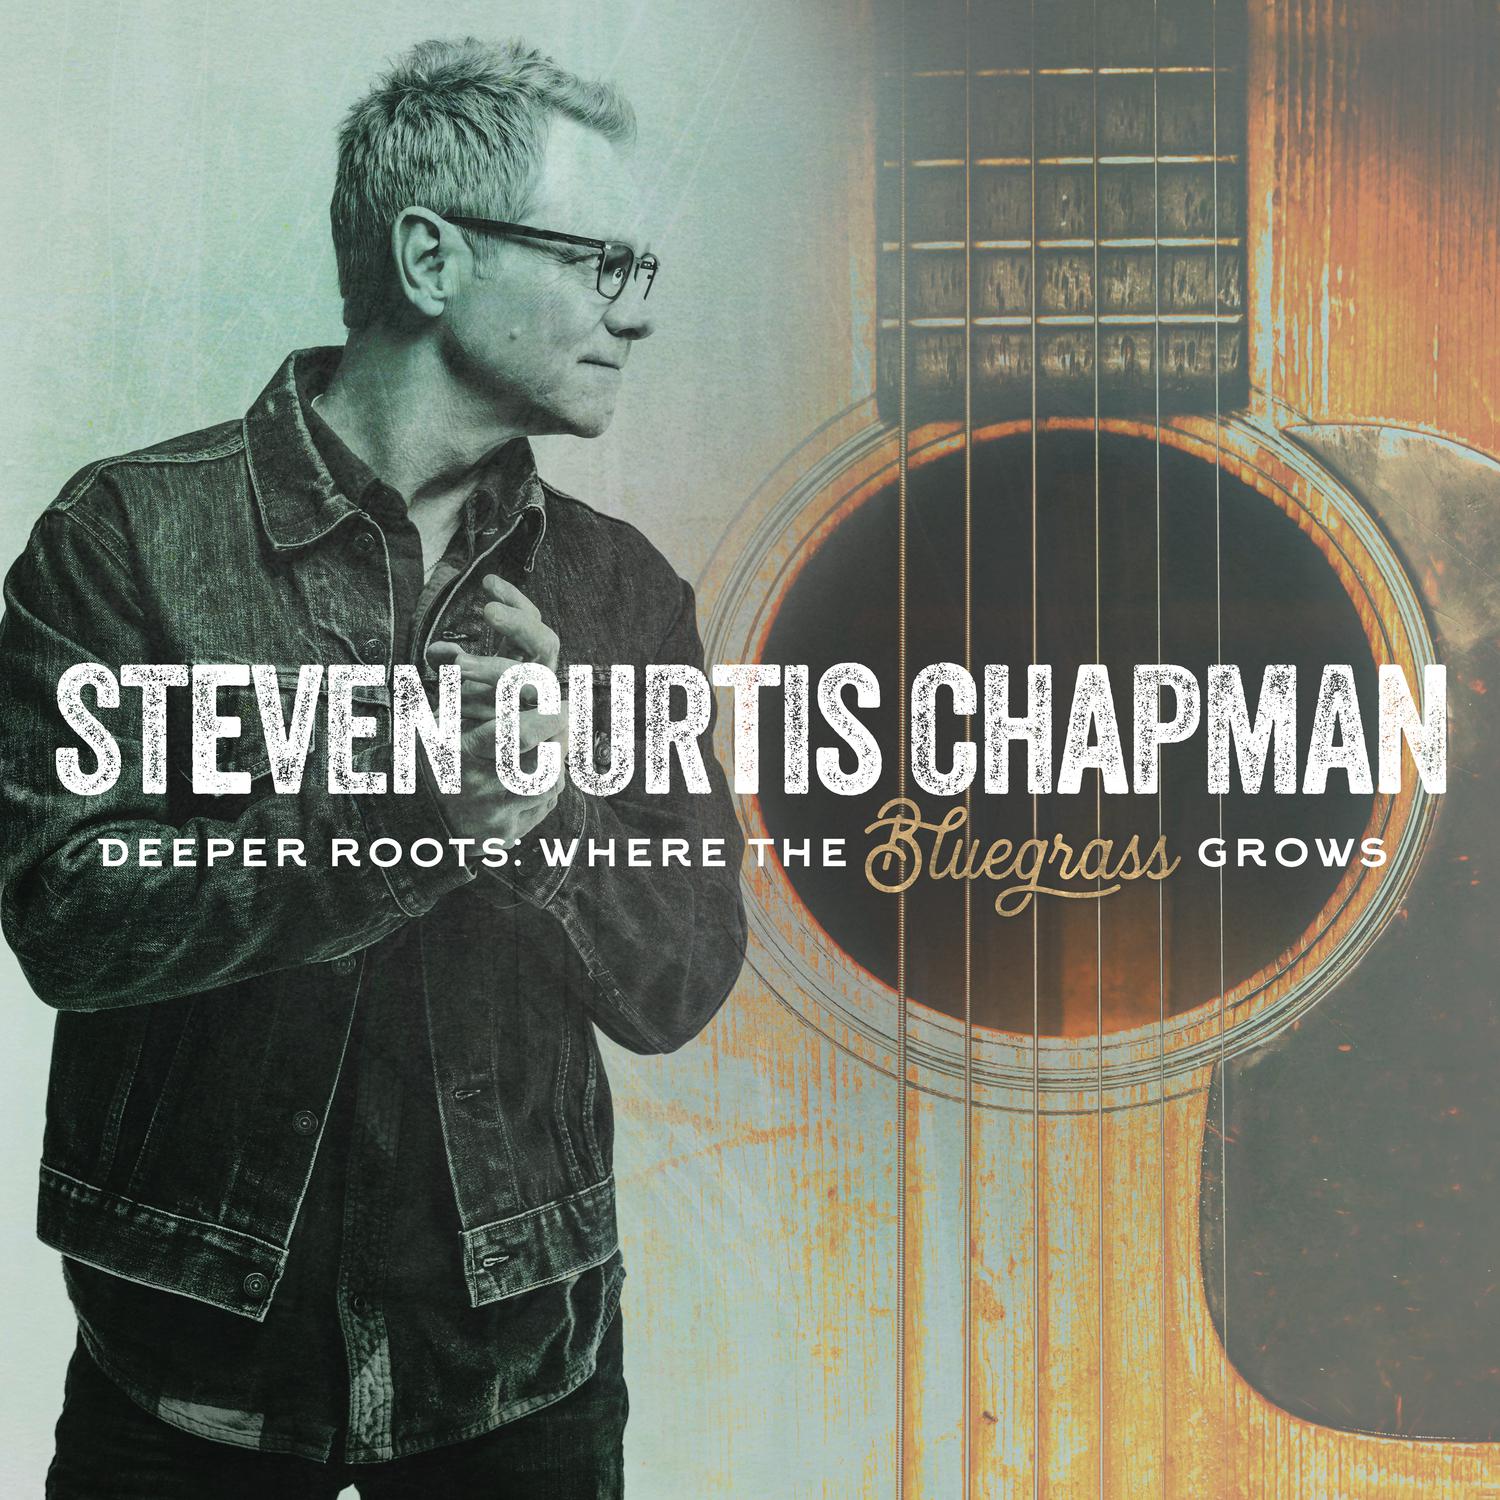 Steven Curtis Chapman - Be Still and Know (feat. Caleb Chapman)